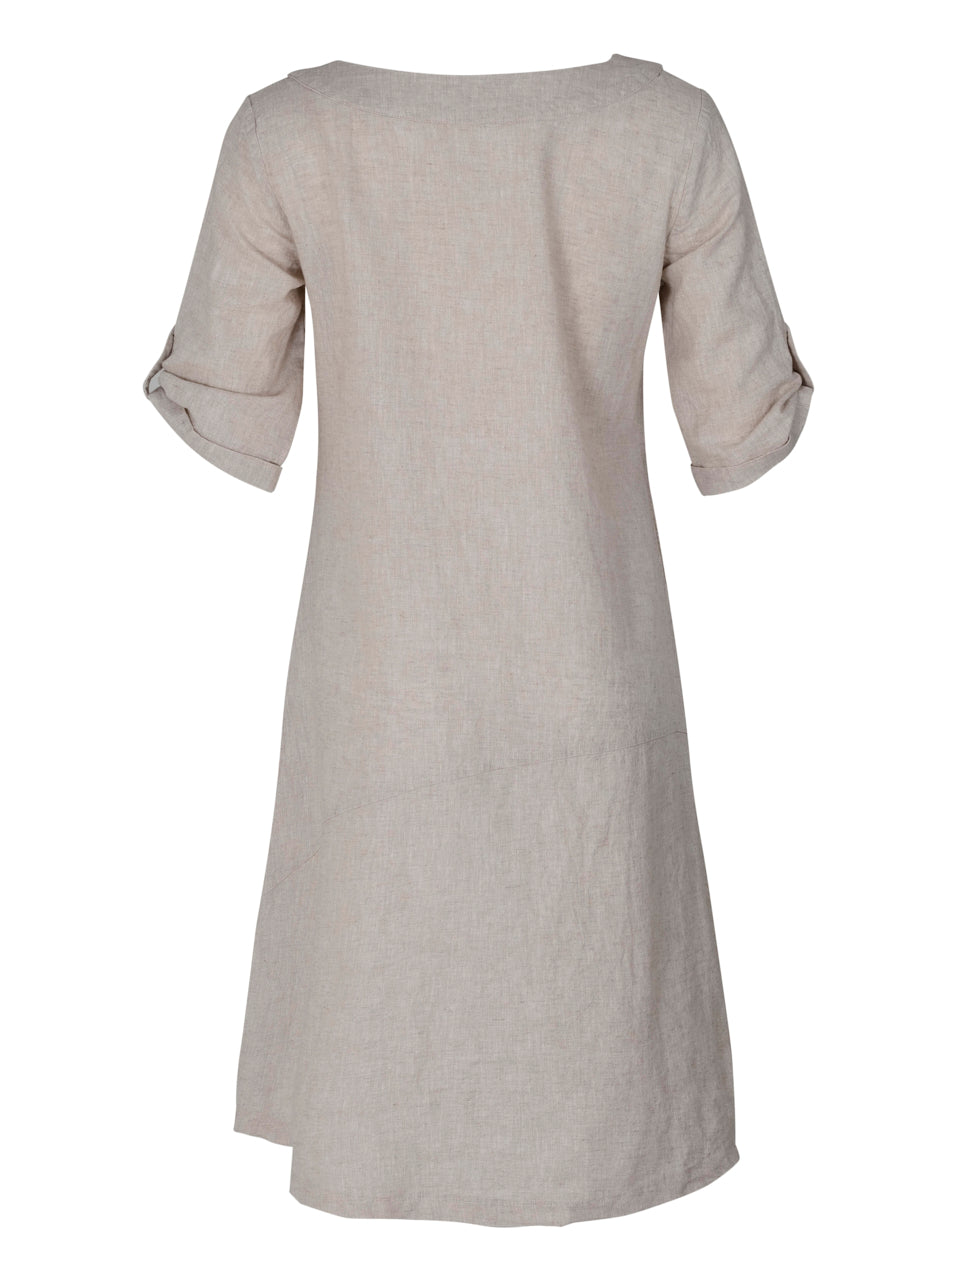 EverSassy Spring 2023 women's casual linen shift t-shirt dress with pocket - natural back